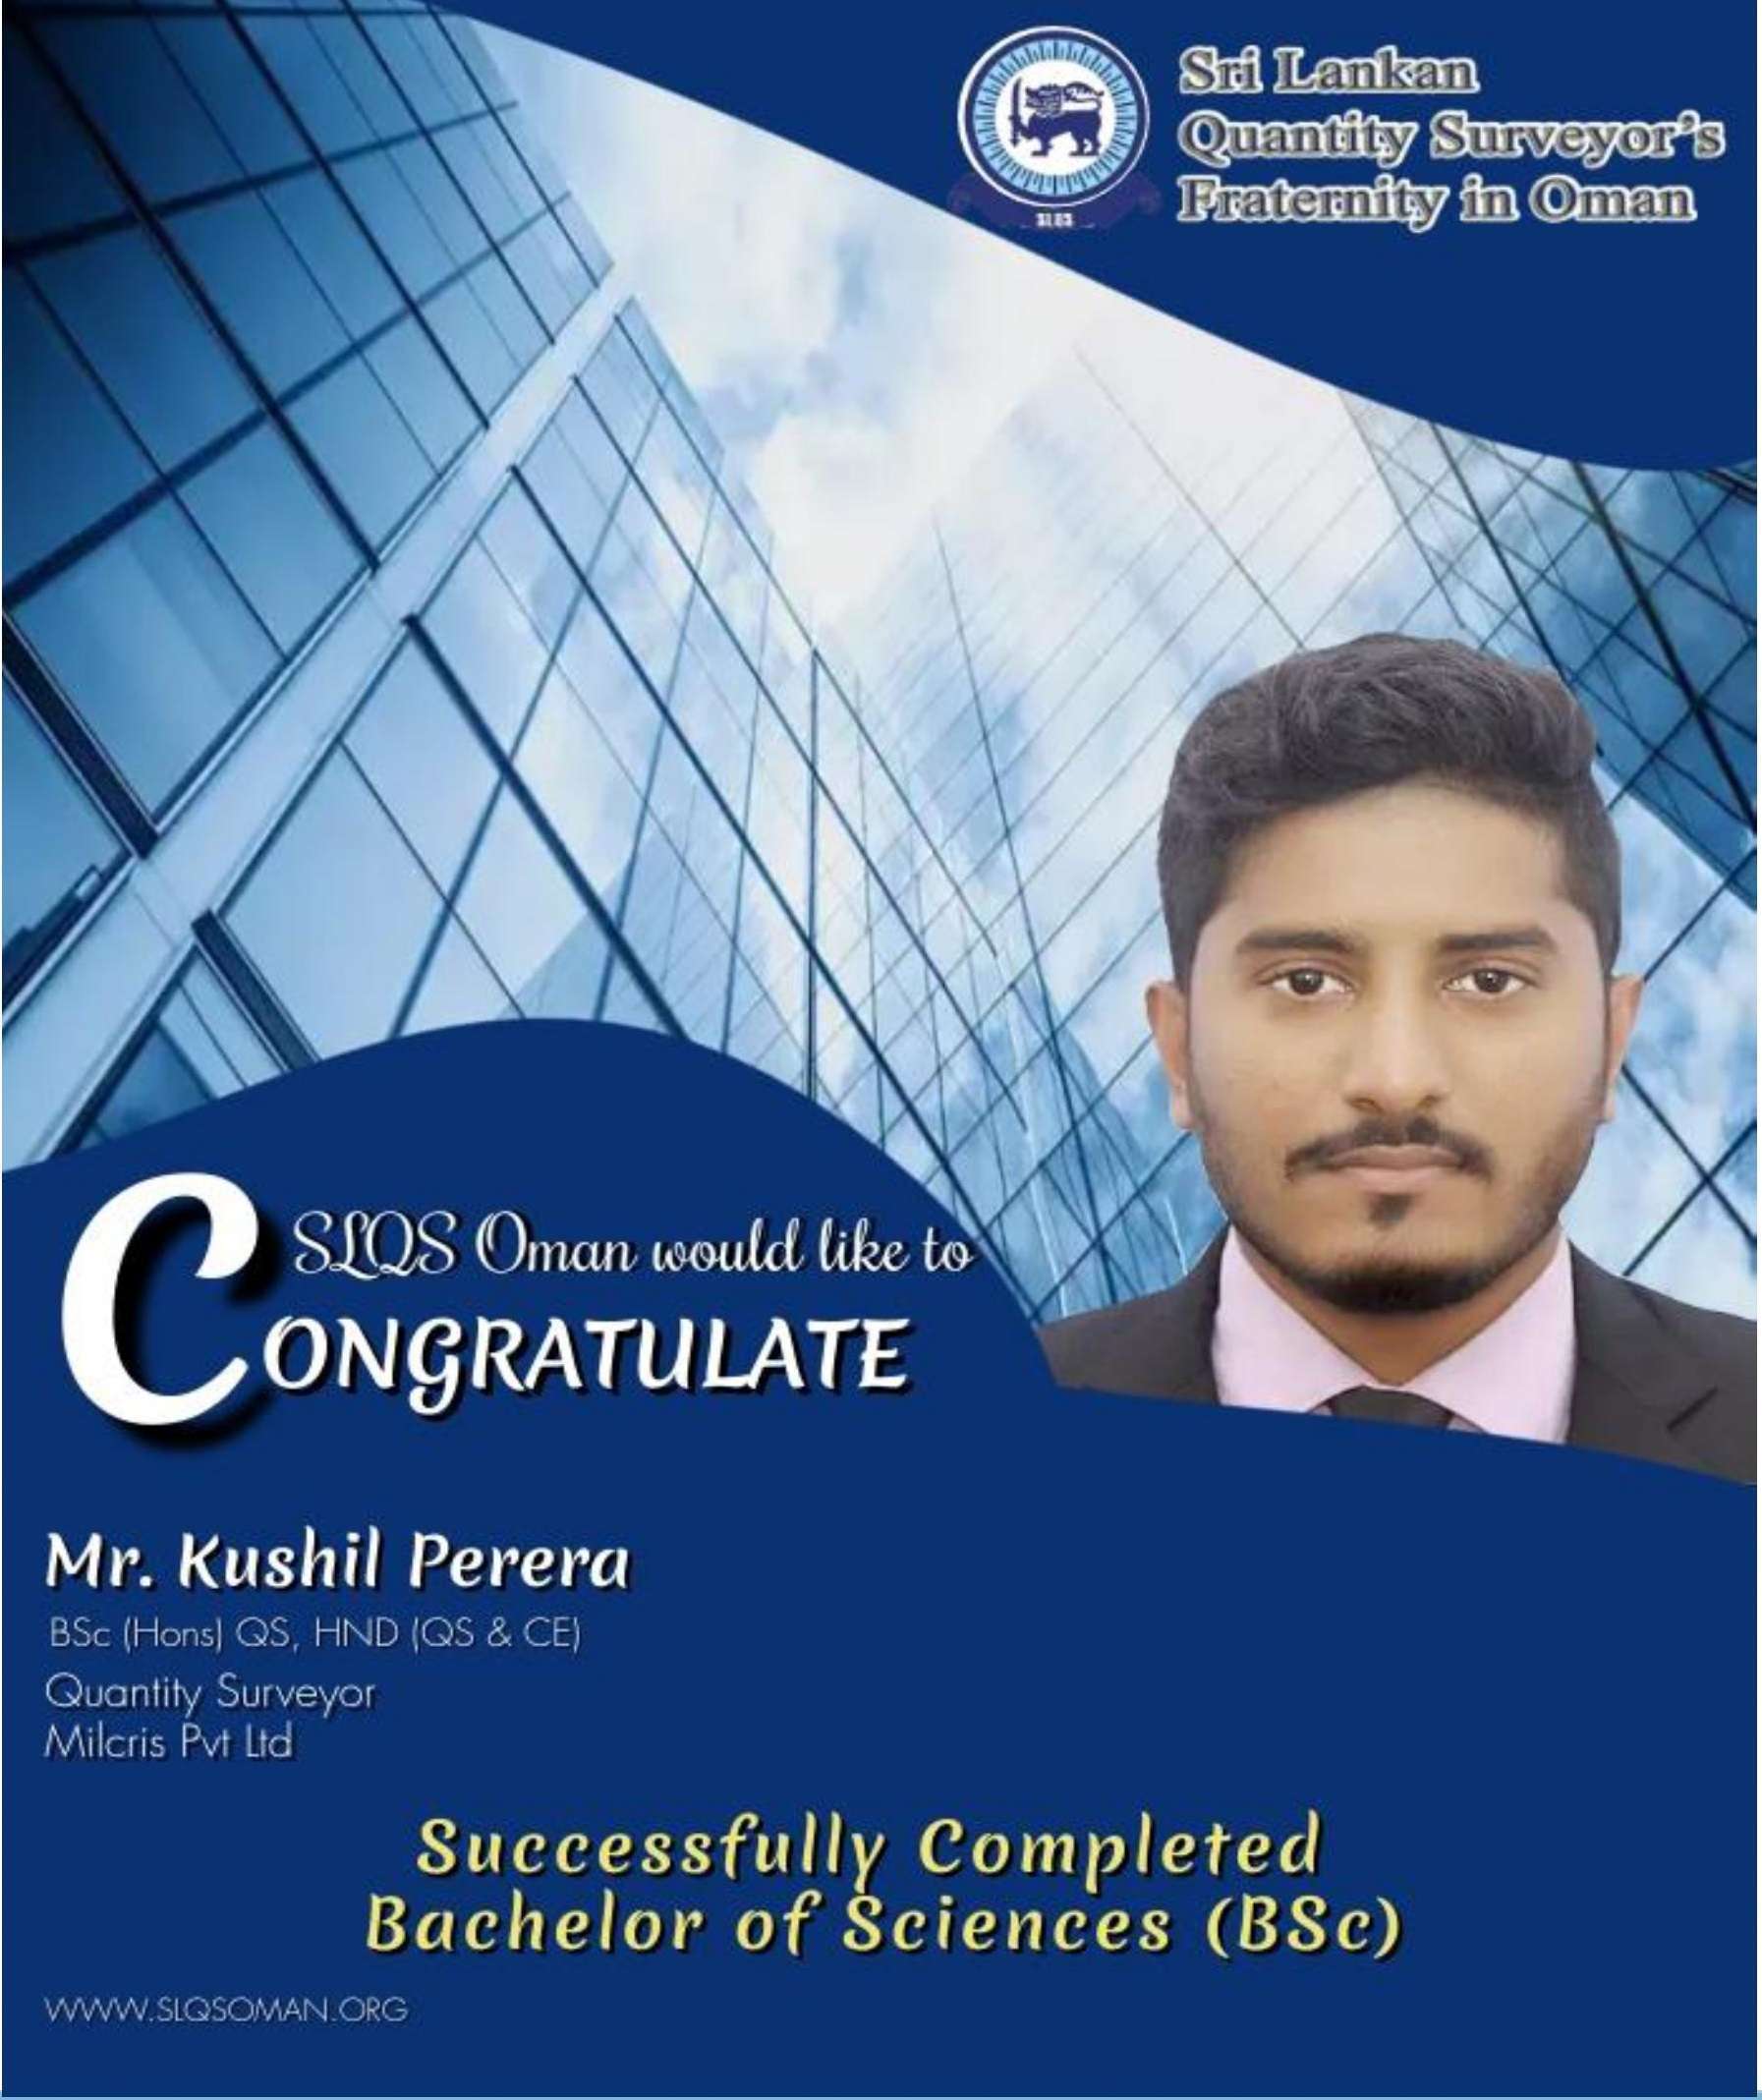 Congratulations!! Mr. Kushil Perera!! For successfully completion of BSc.